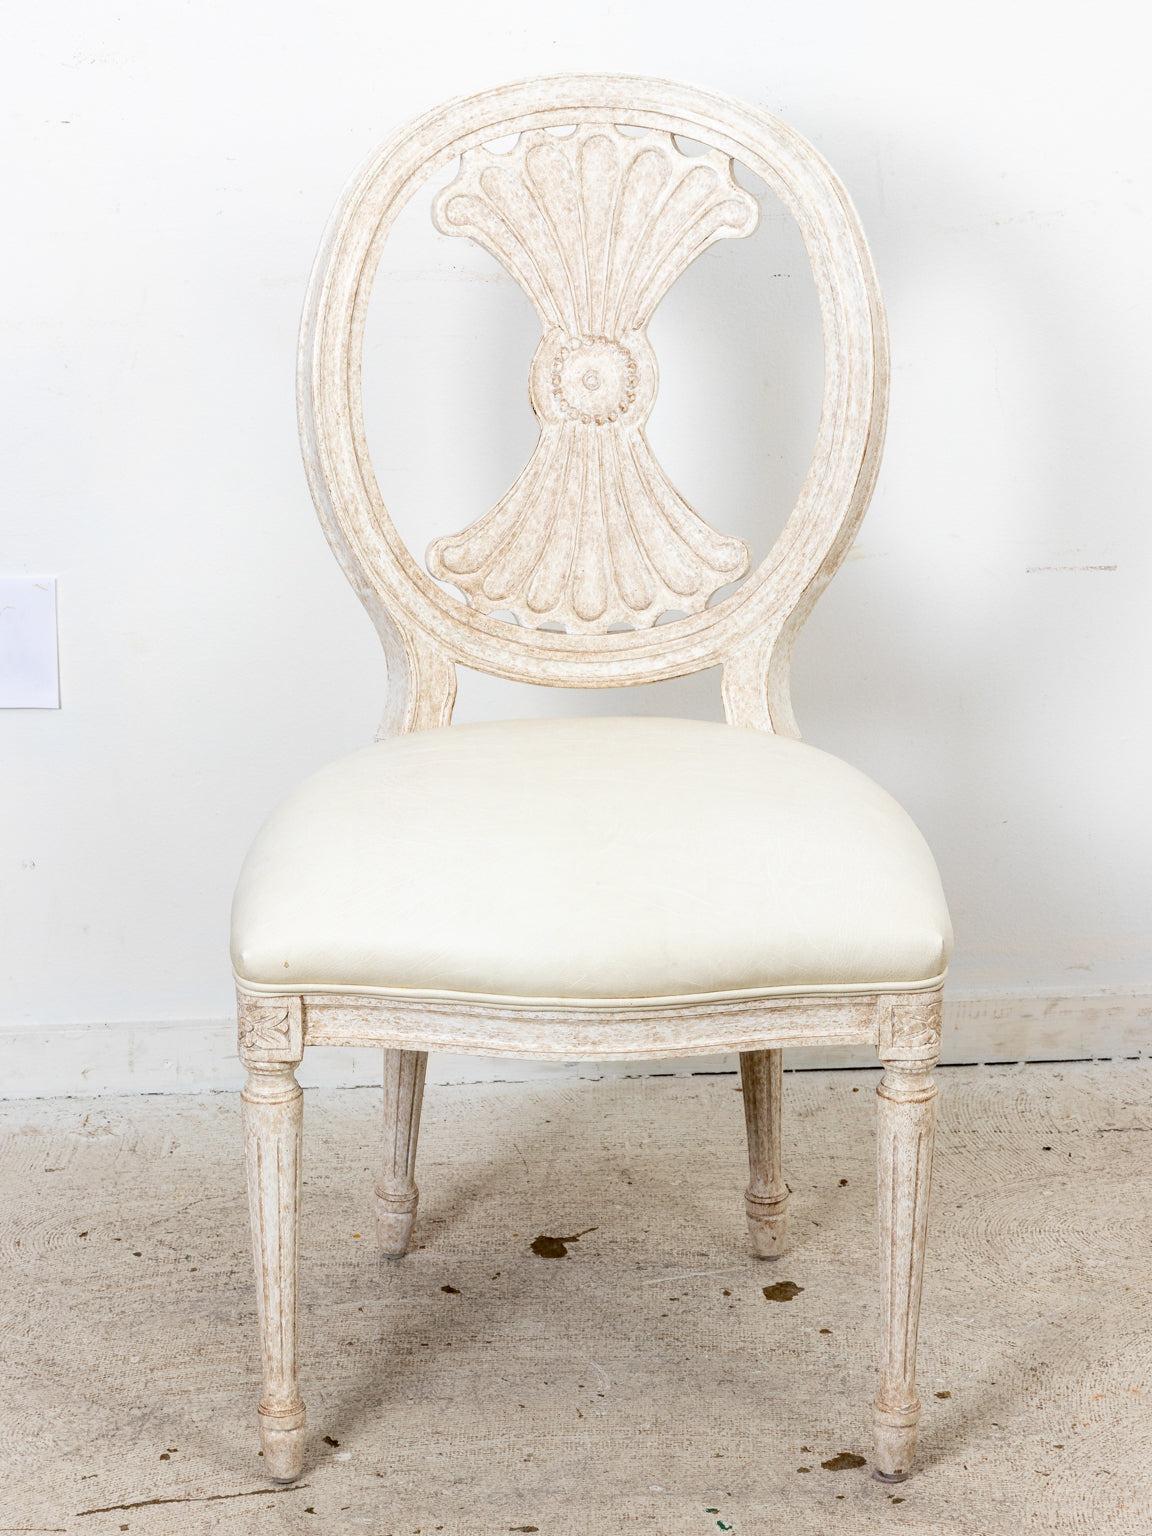 Set of 6 Swedish style dining chairs with distressed white wash finish and tight vegan leather upholstered seats. Please note of wear consistent with age.